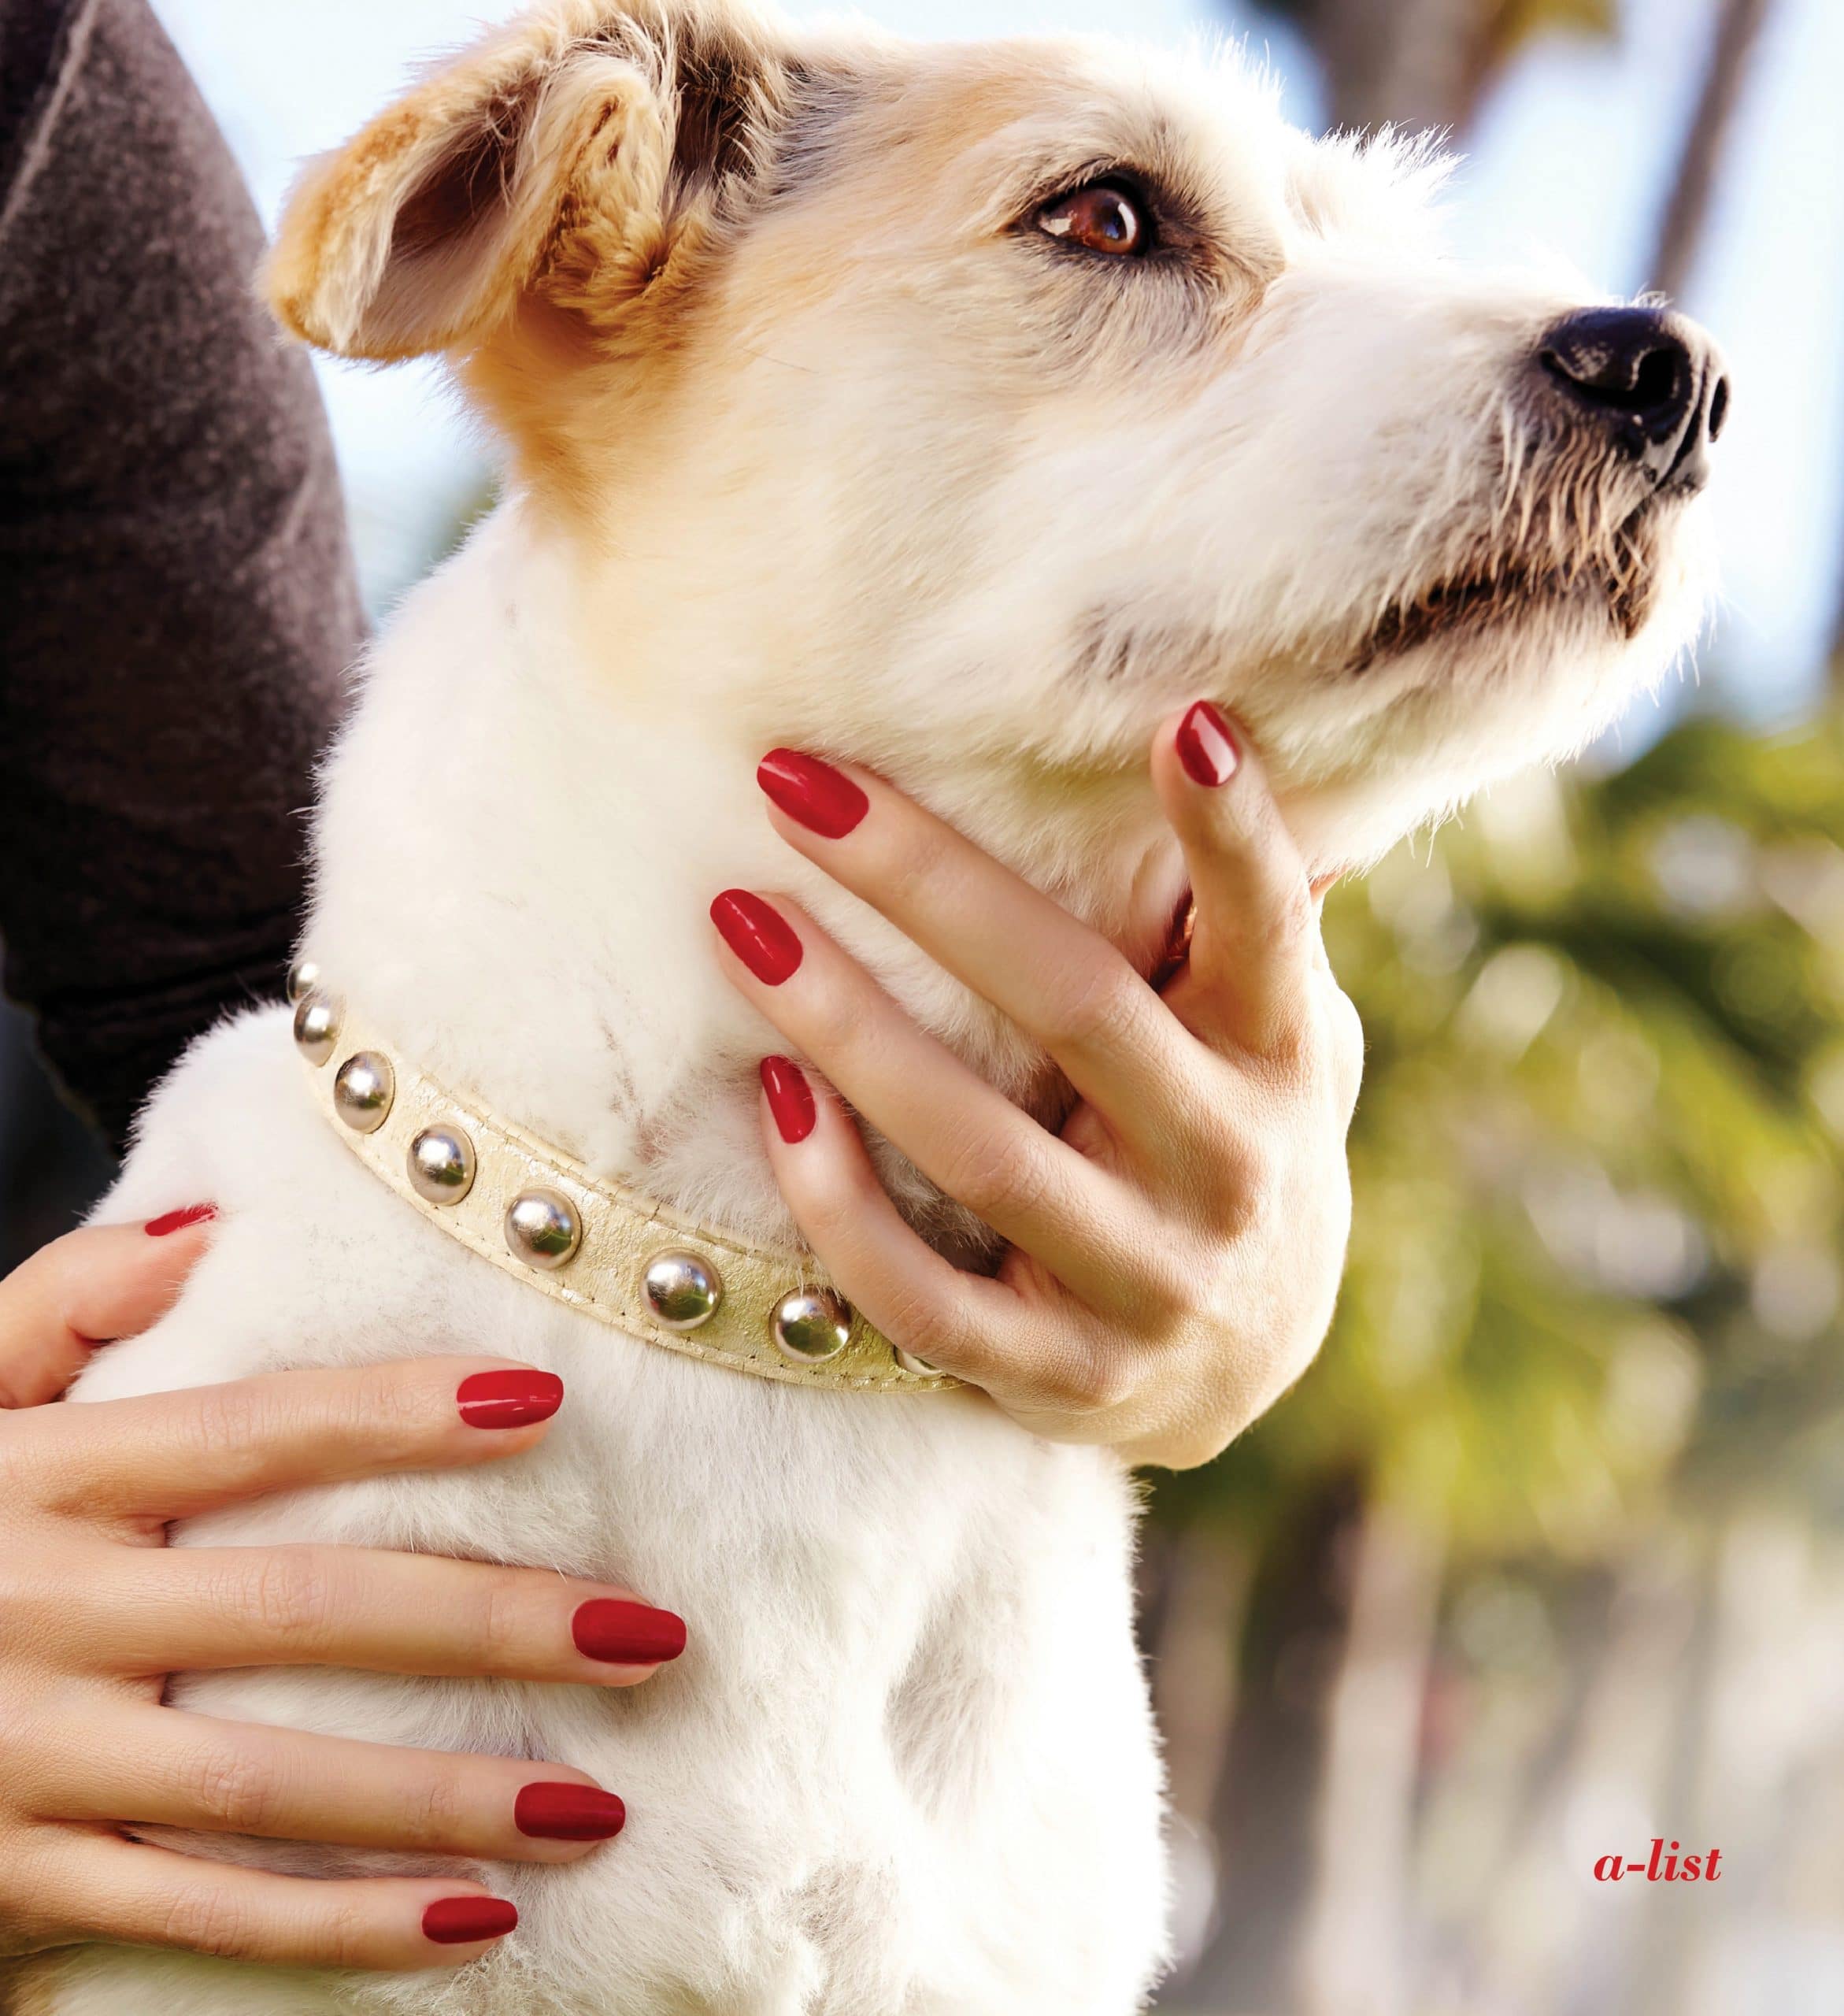 She was the model mutt for an Essie ad featuring mommy’s polished paws… 